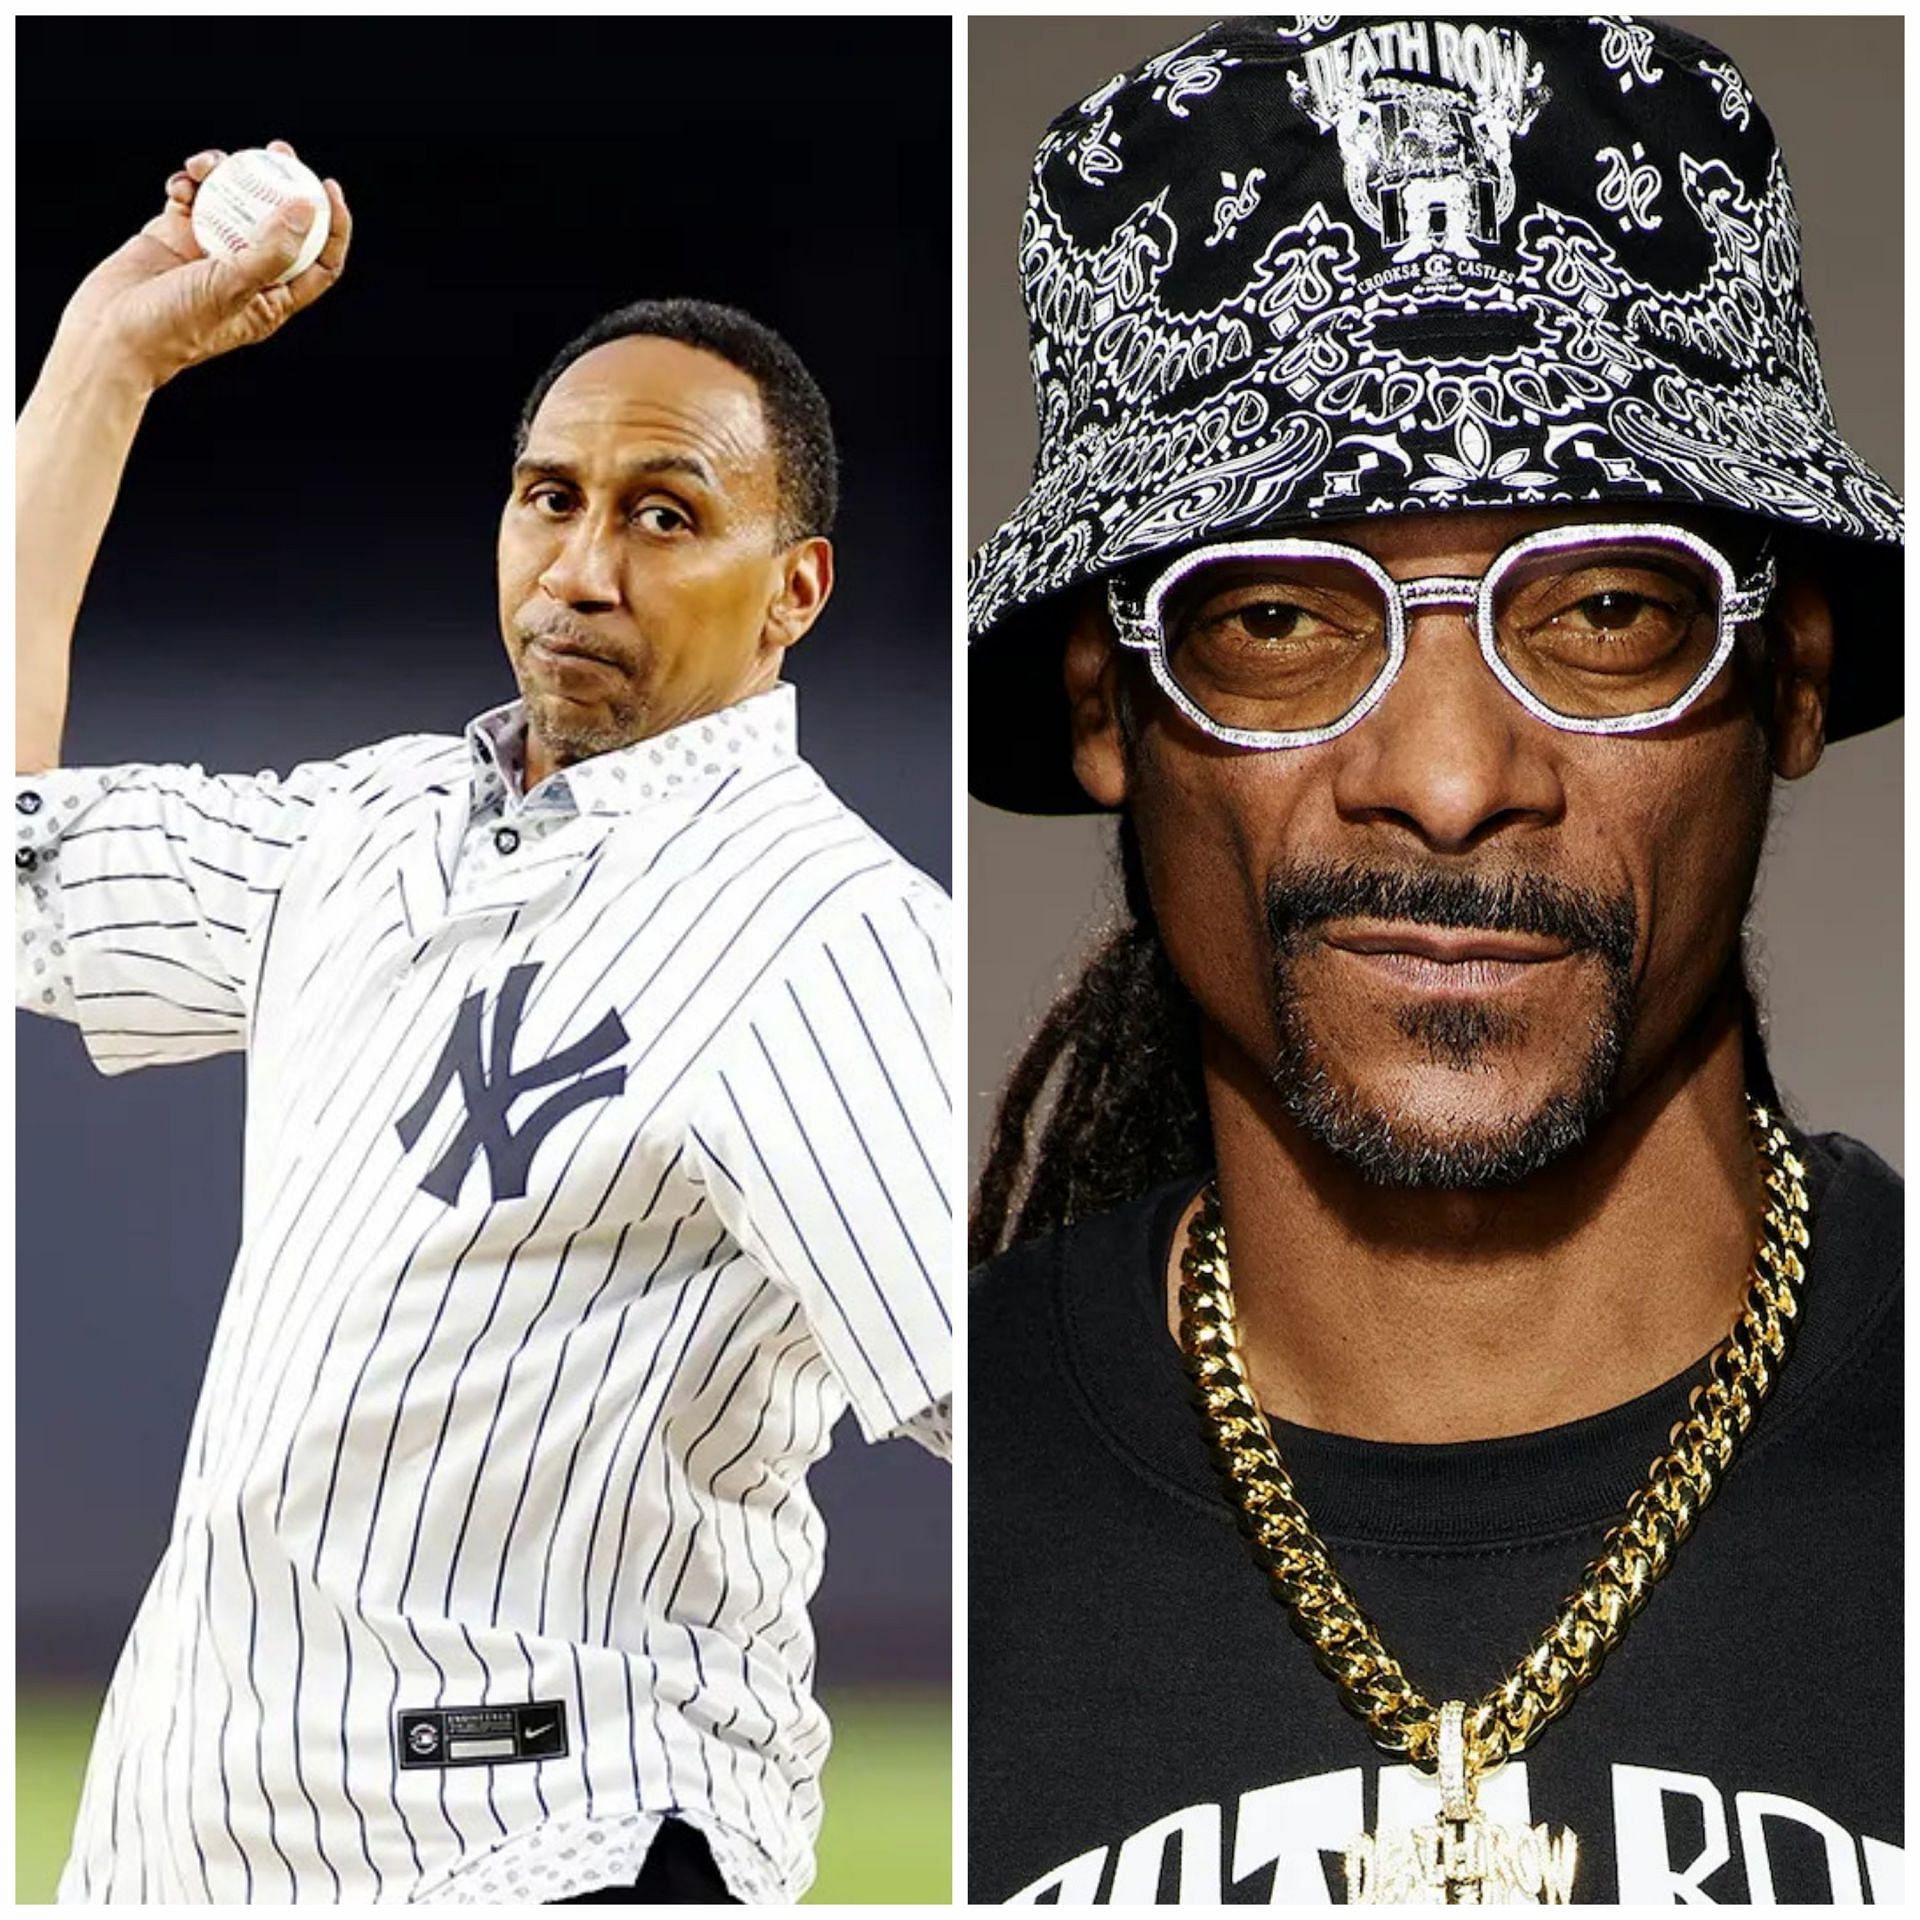 Snoop Dogg mercilessly roasts Stephen A. Smith for his flop first pitch at Yankee stadium